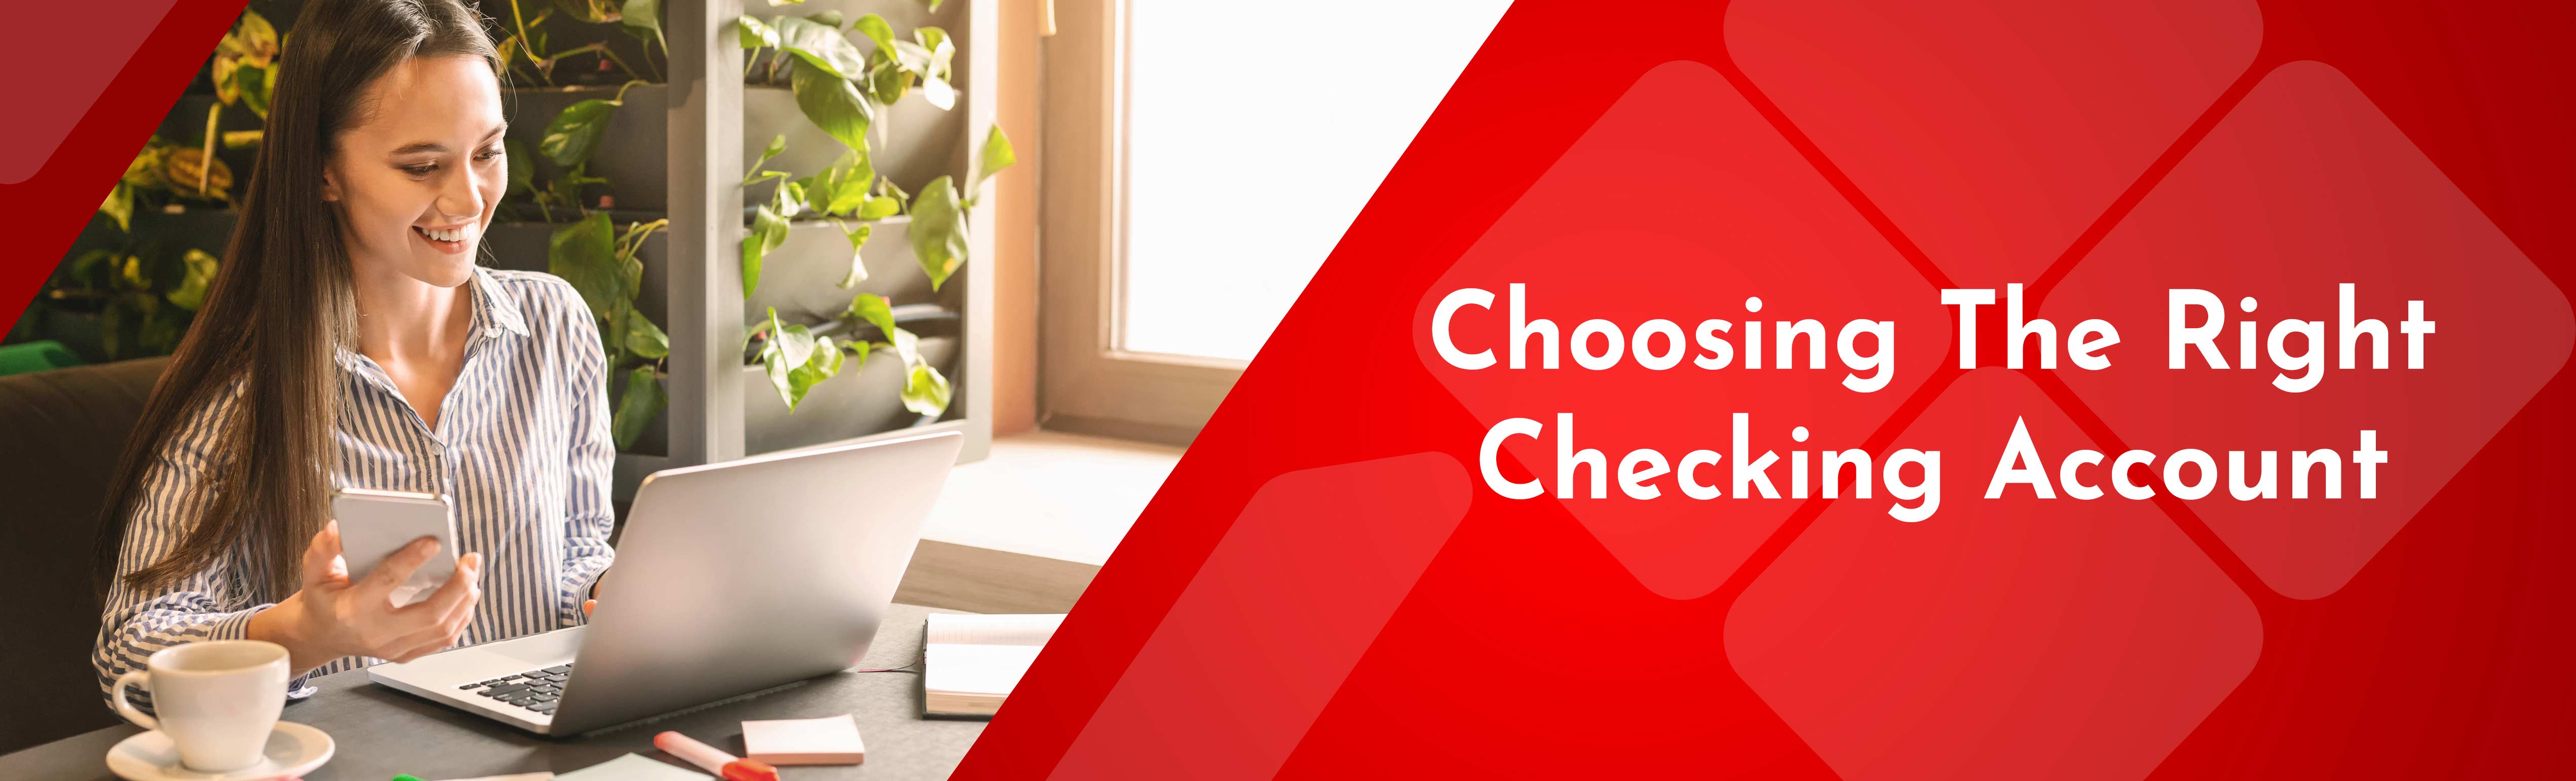 Choose The Right Checking Account